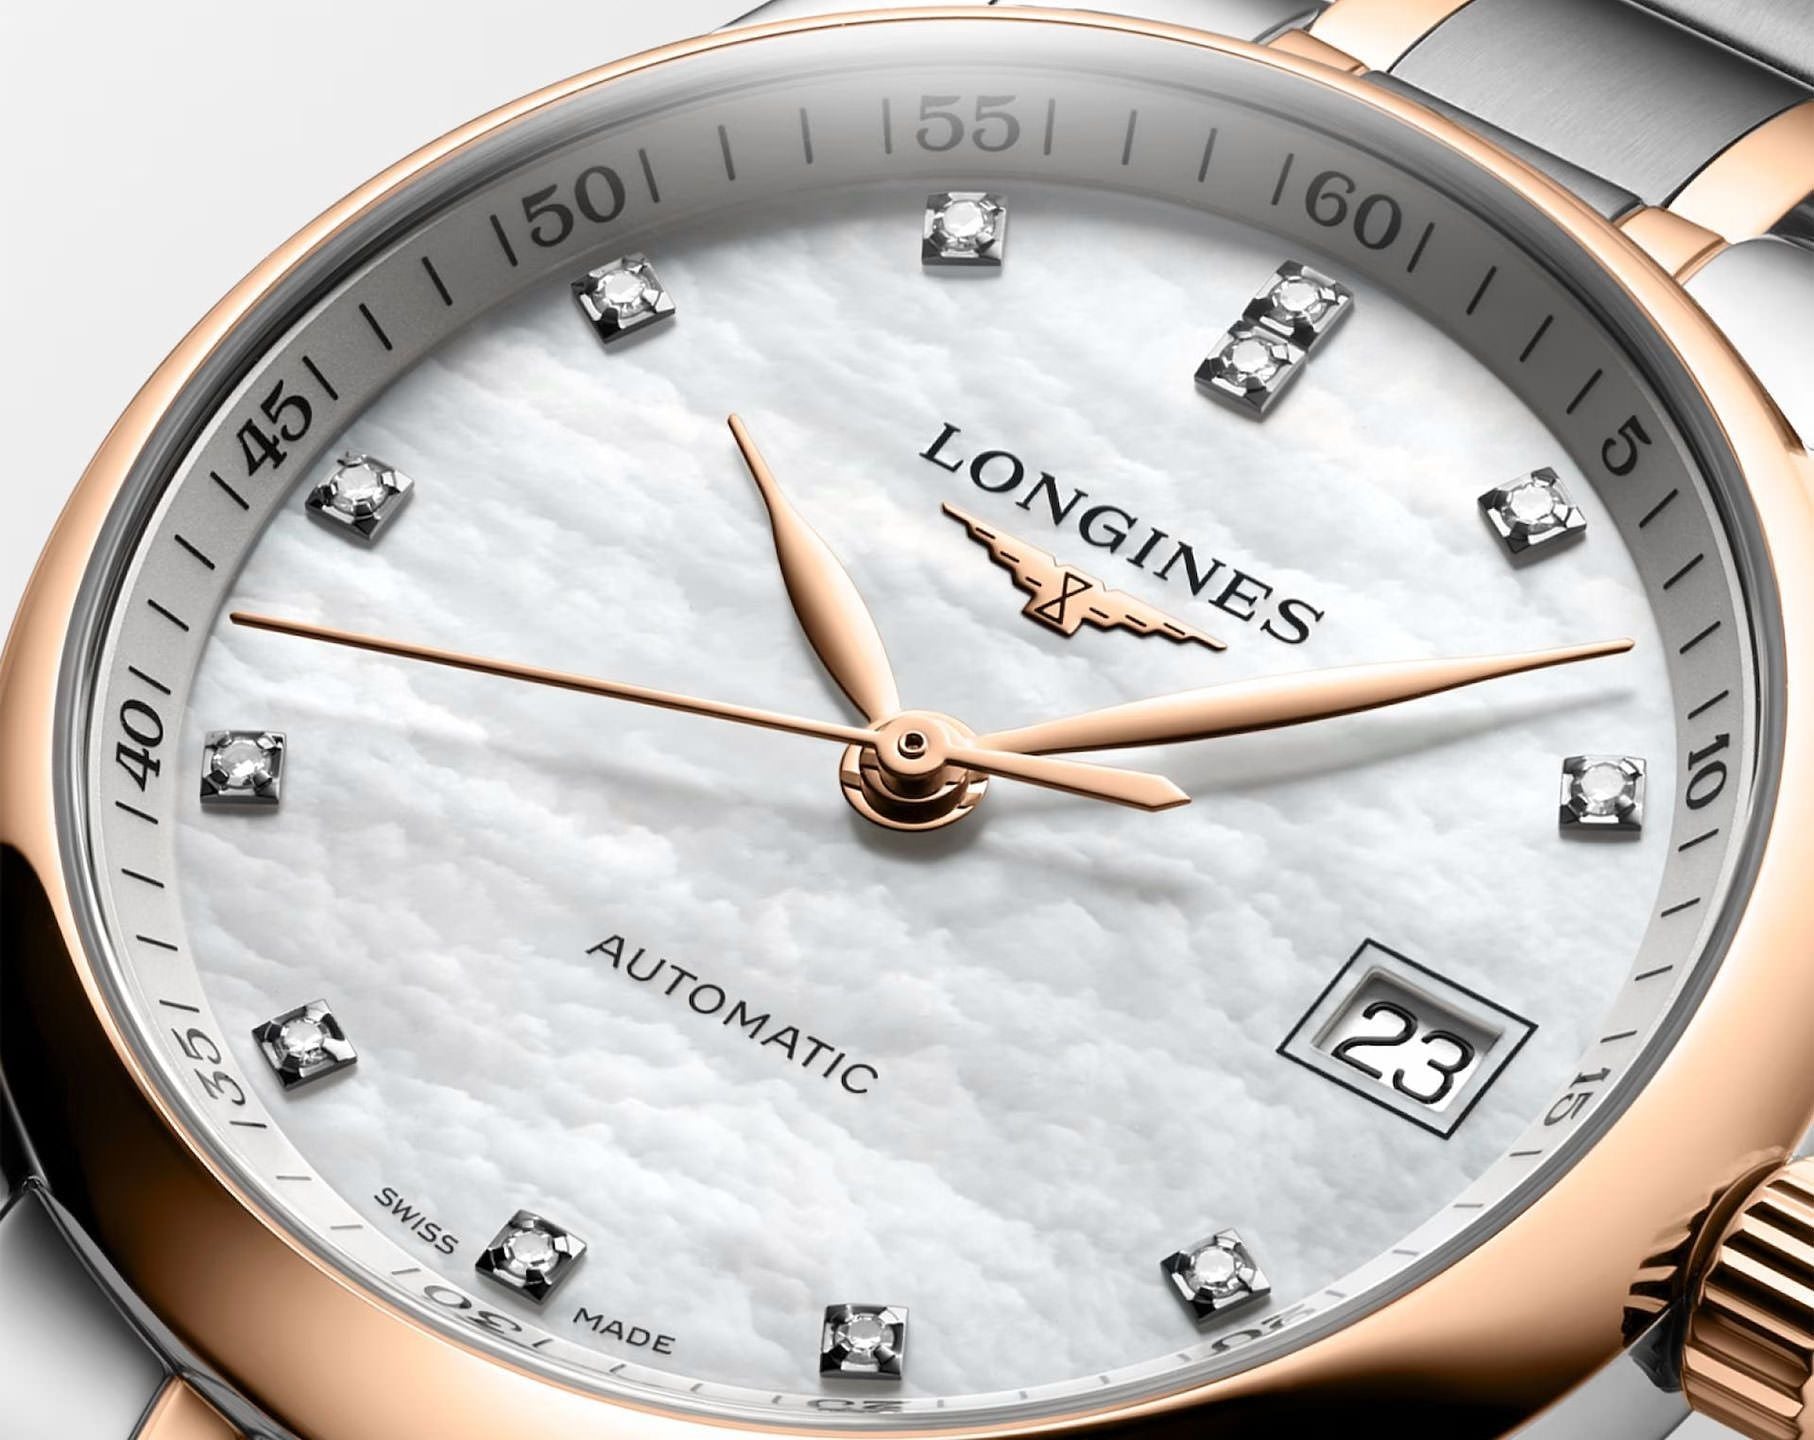 LONGINES The Longines Master Collection L2.357.5.89.7